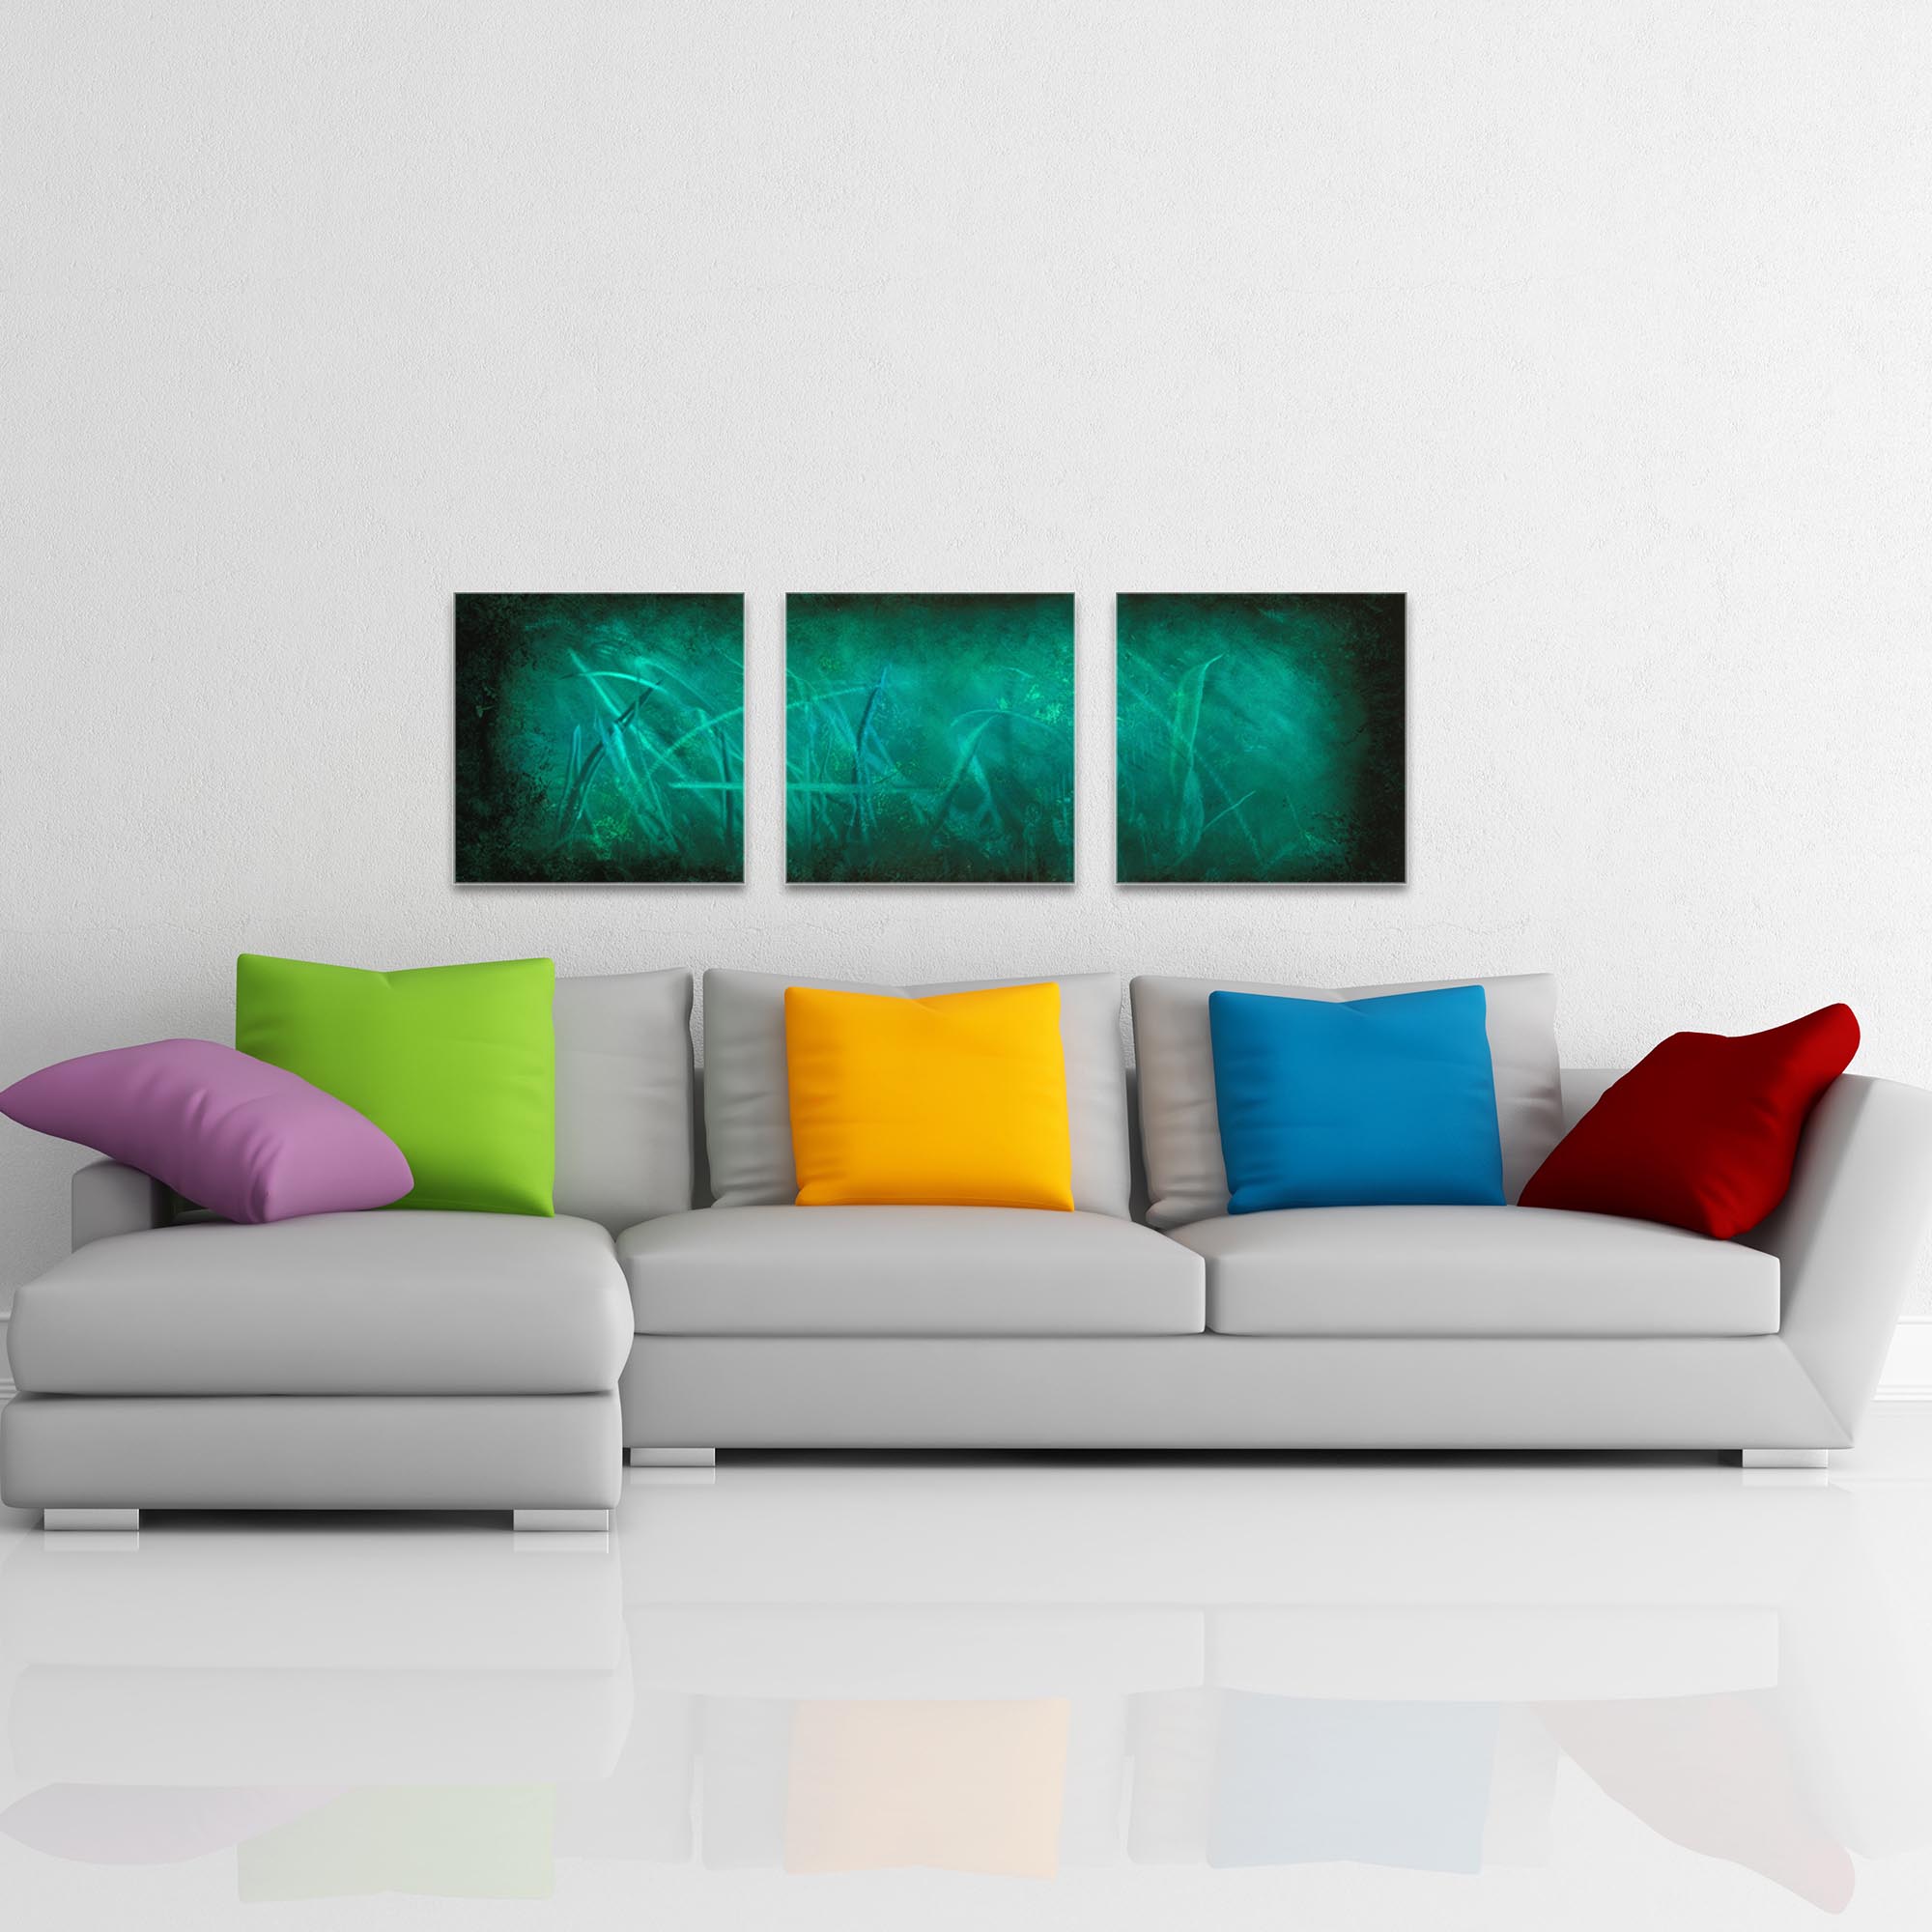 Ocean Mist Triptych Large 70x22in. Metal or Acrylic Abstract Decor - Image 3